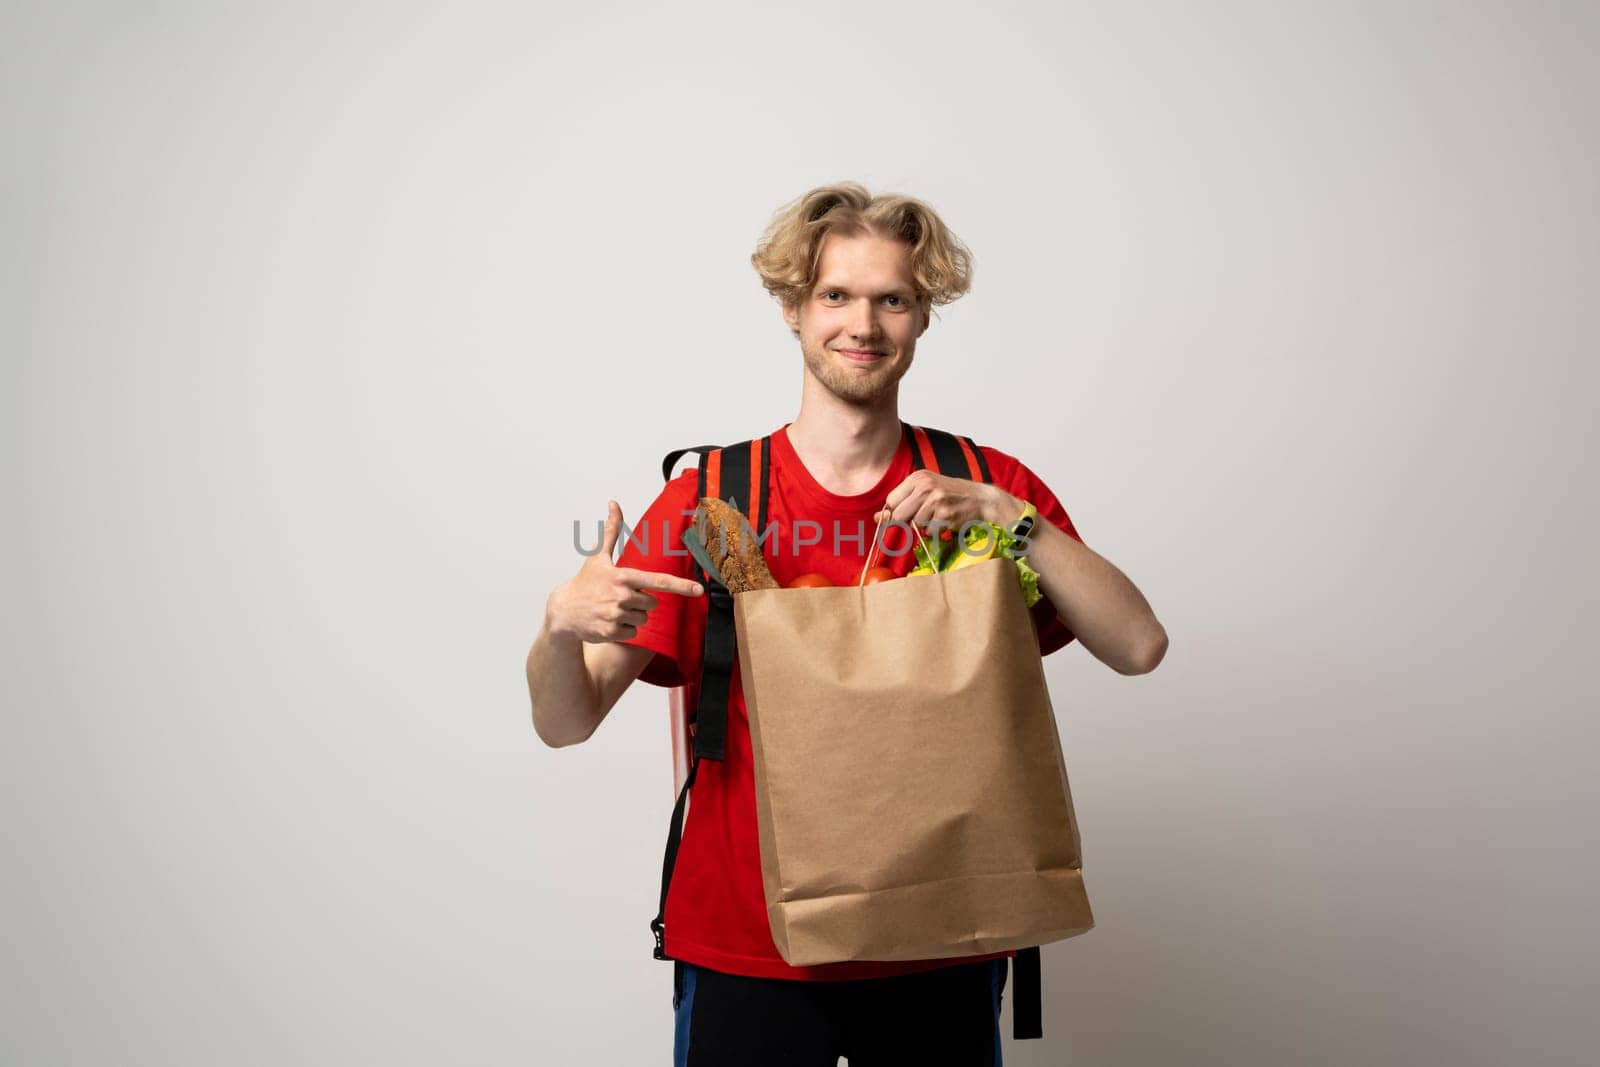 Food delivery service. Portrait of pleased delivery man in red uniform smiling while carrying paper bag with food products isolated over white background. by vovsht